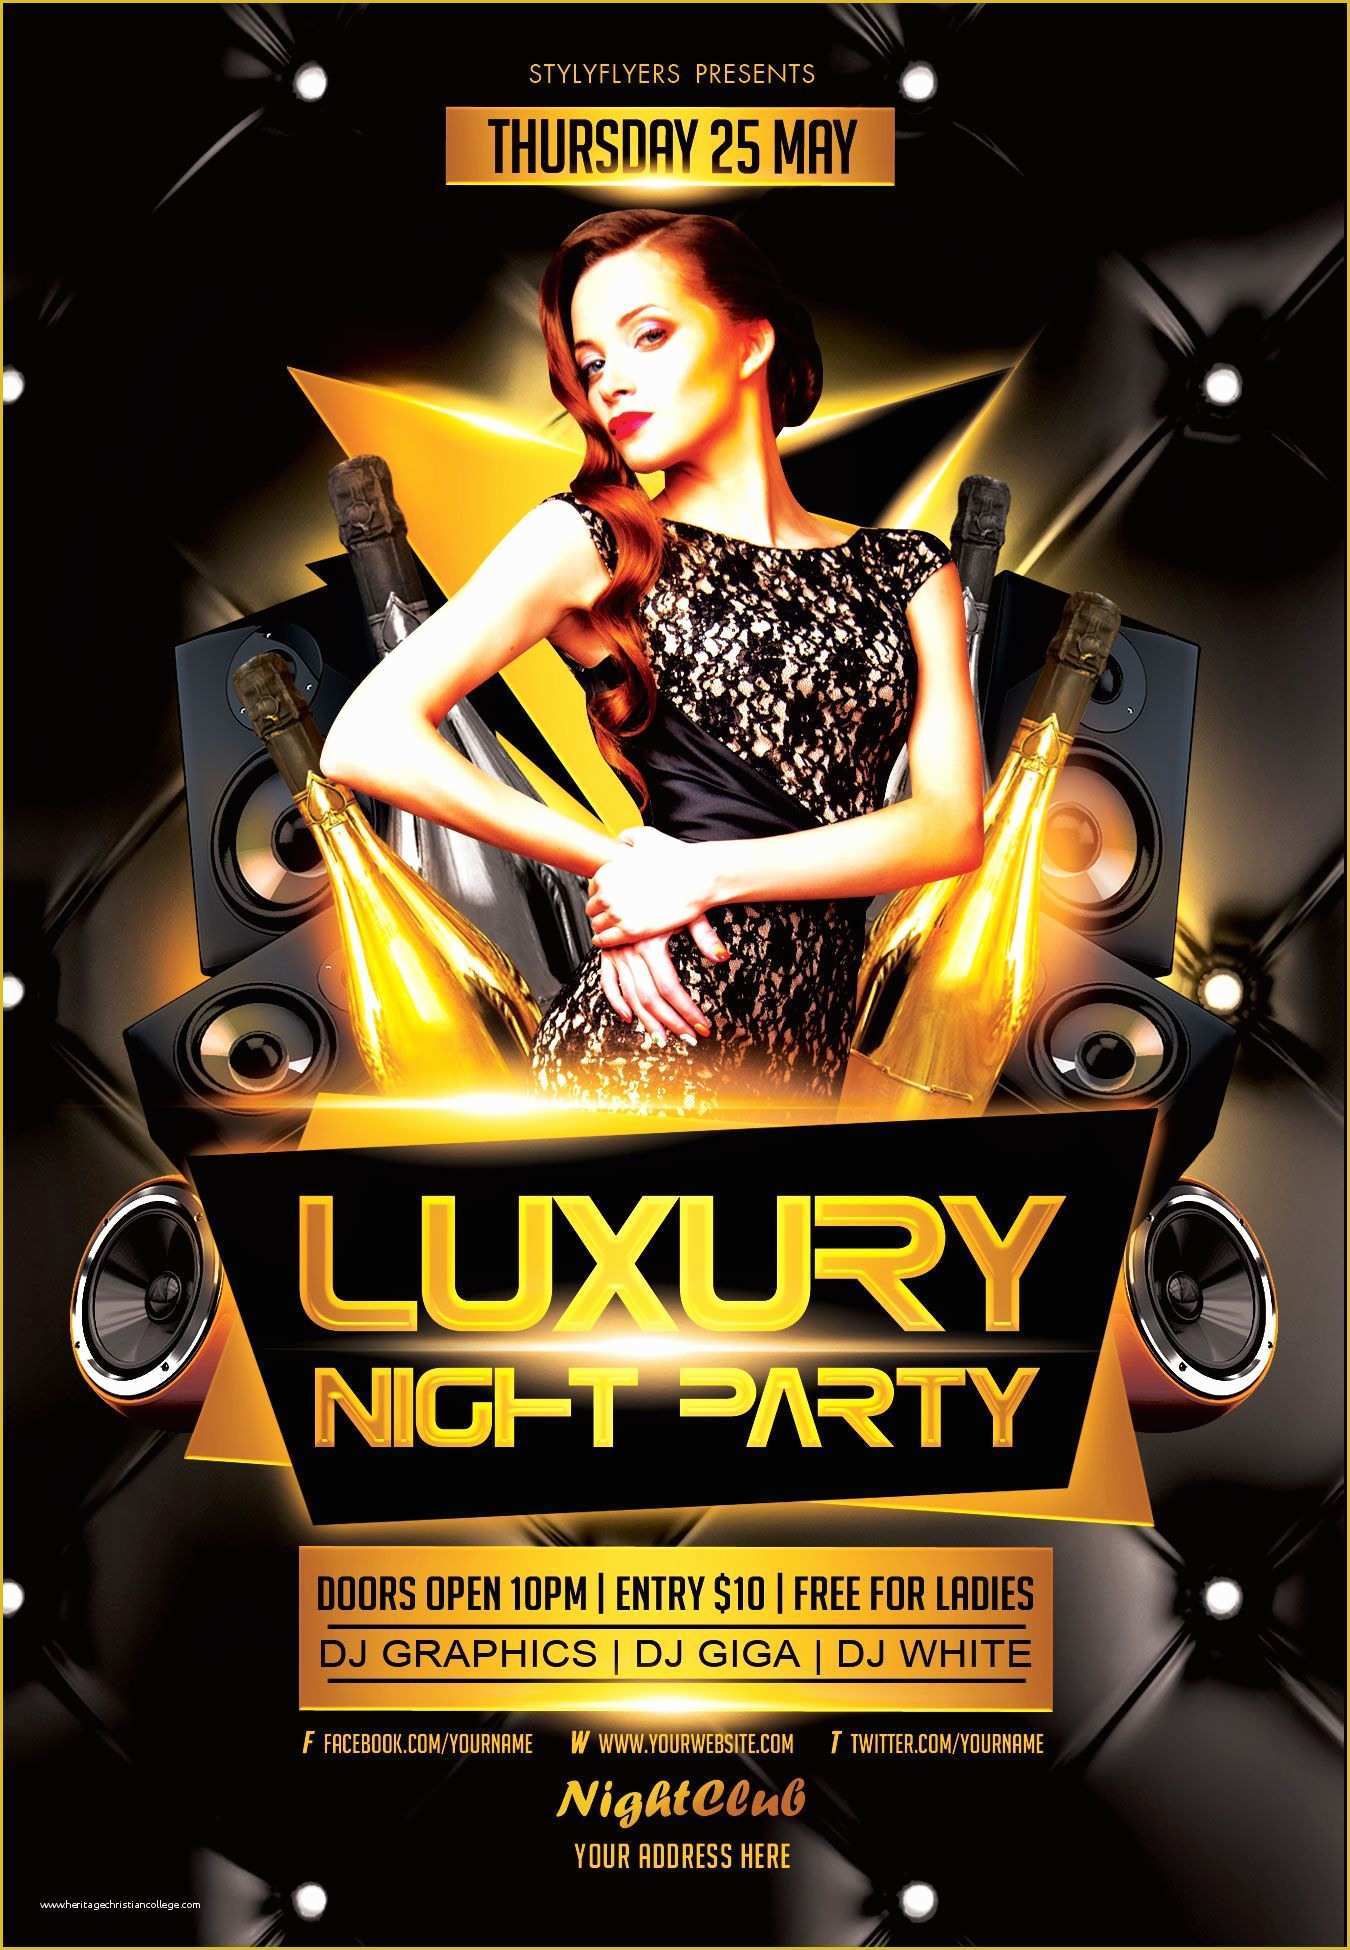 Free Club Flyer Templates Of Free Luxury Night Party Flyer Psd Template by Styleflyer